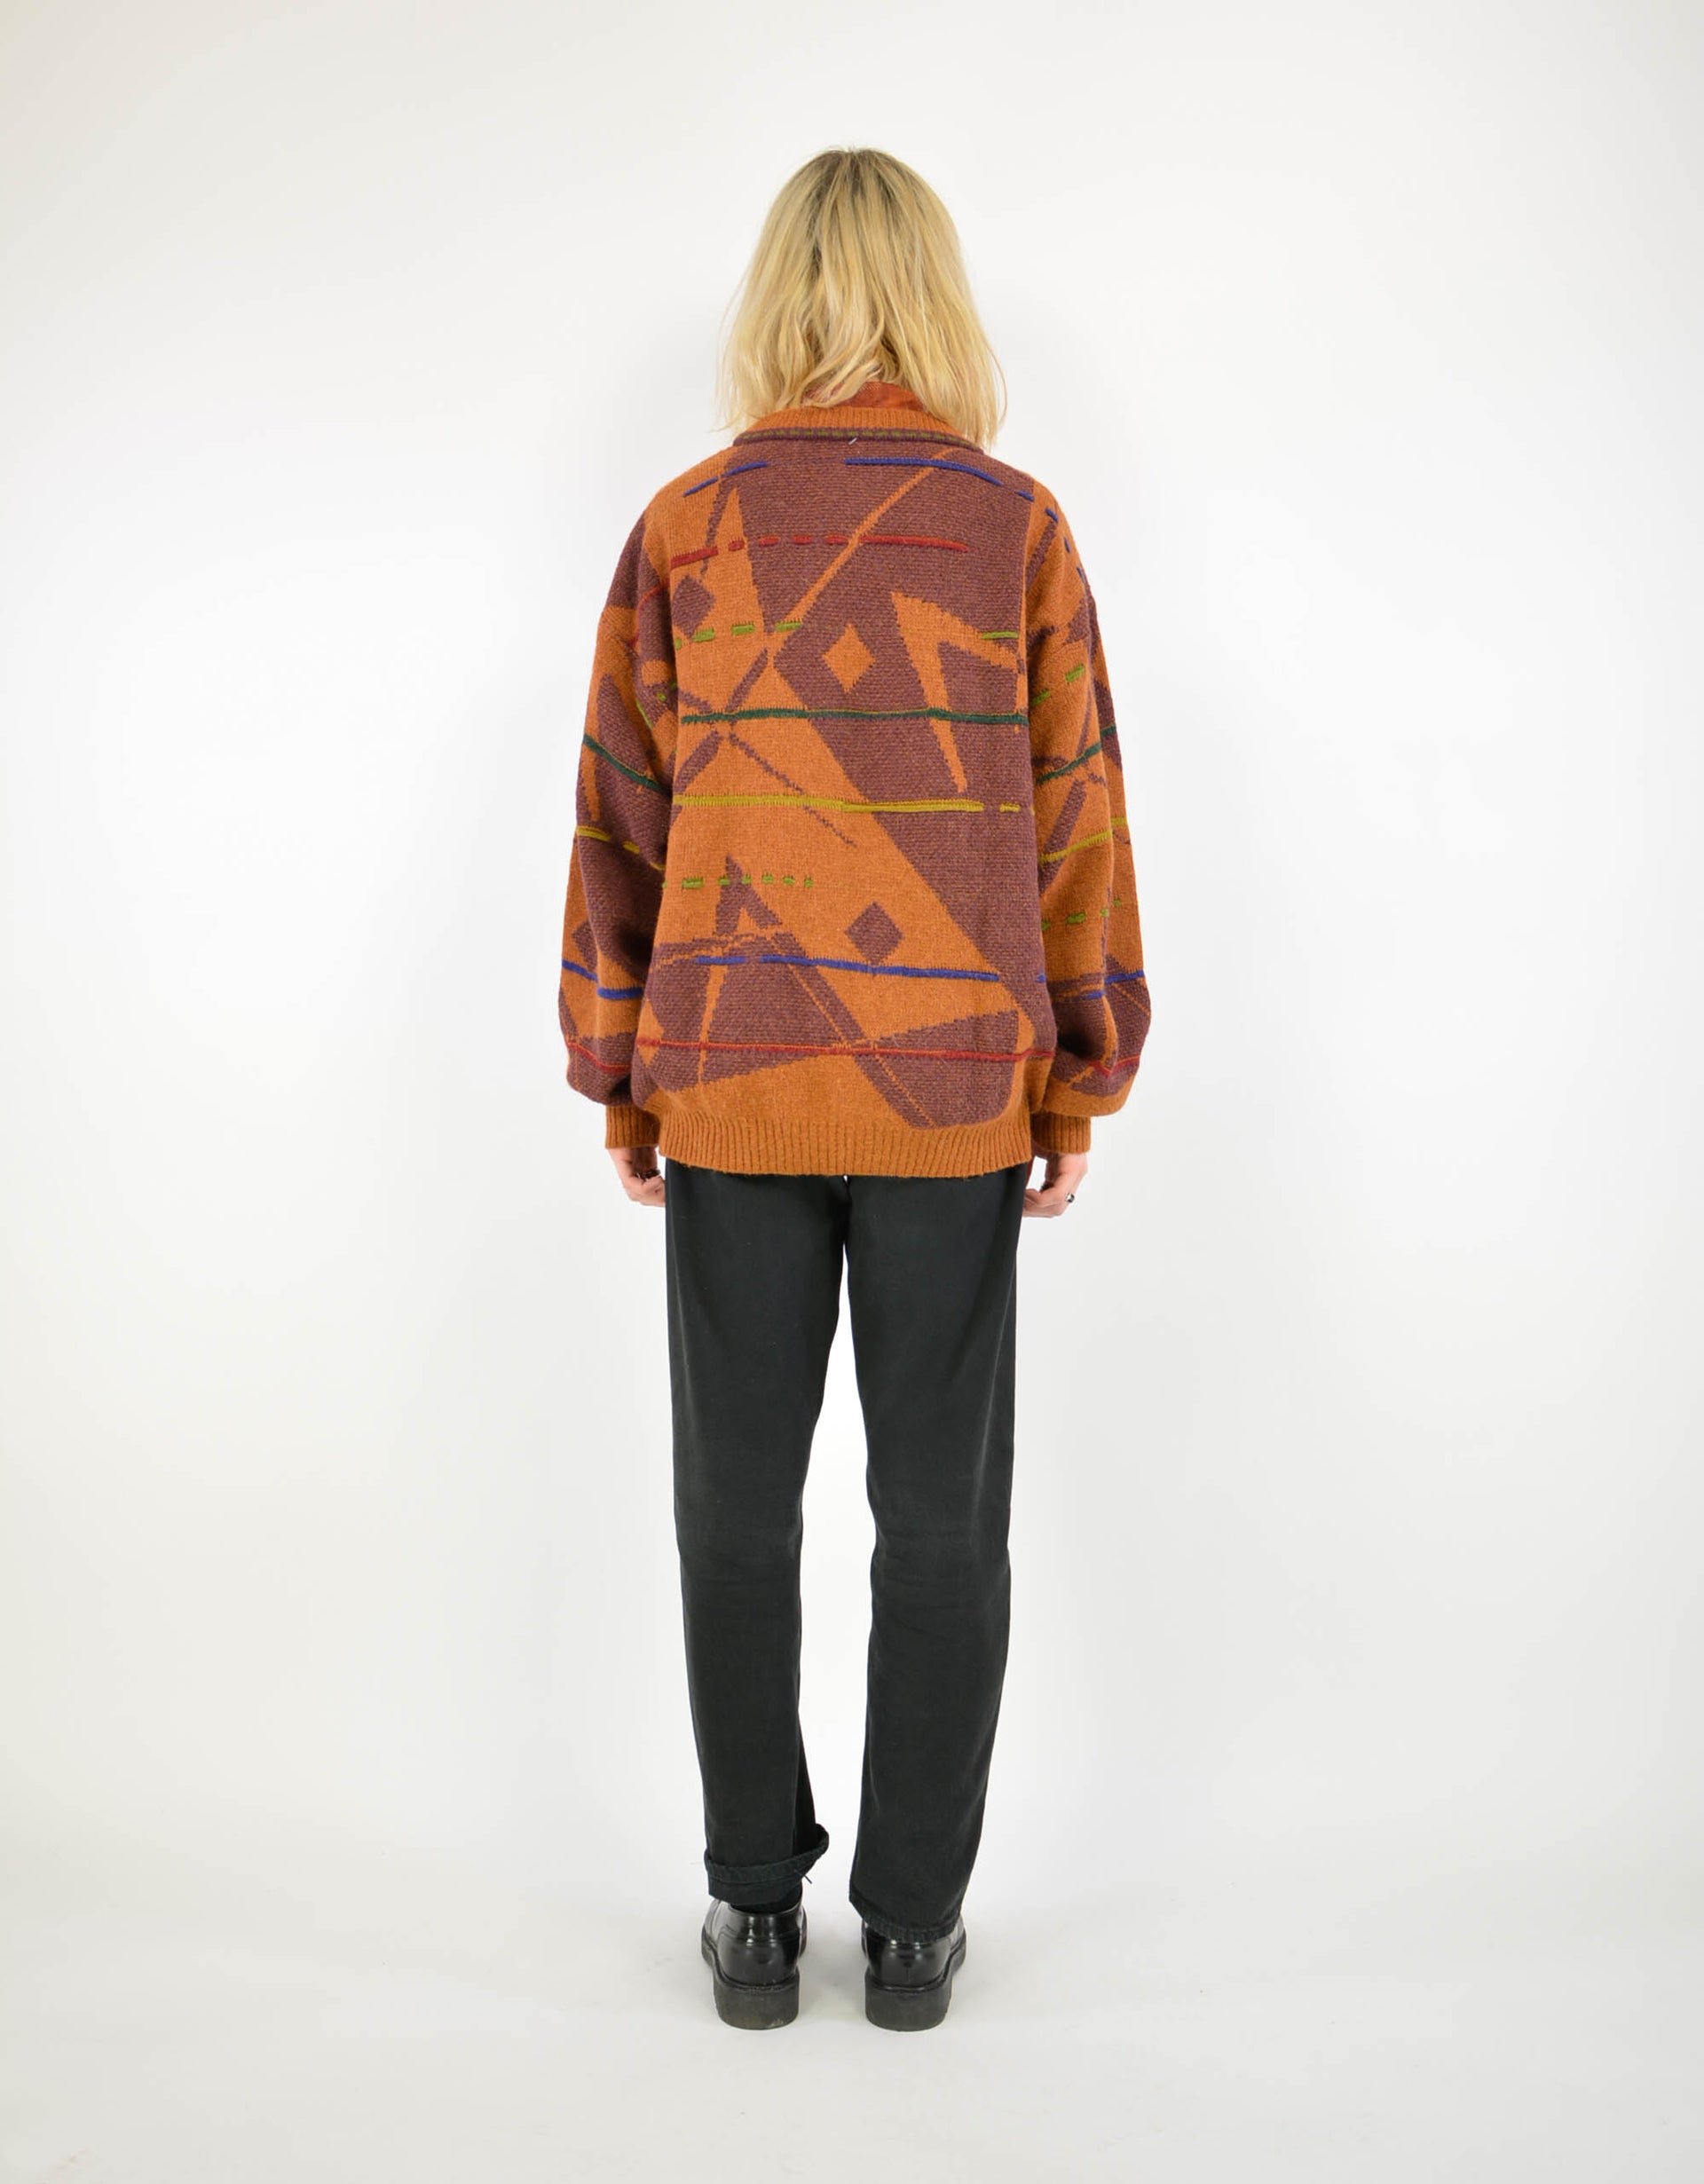 Embroidered knitwear - PICKNWEIGHT - VINTAGE KILO STORE